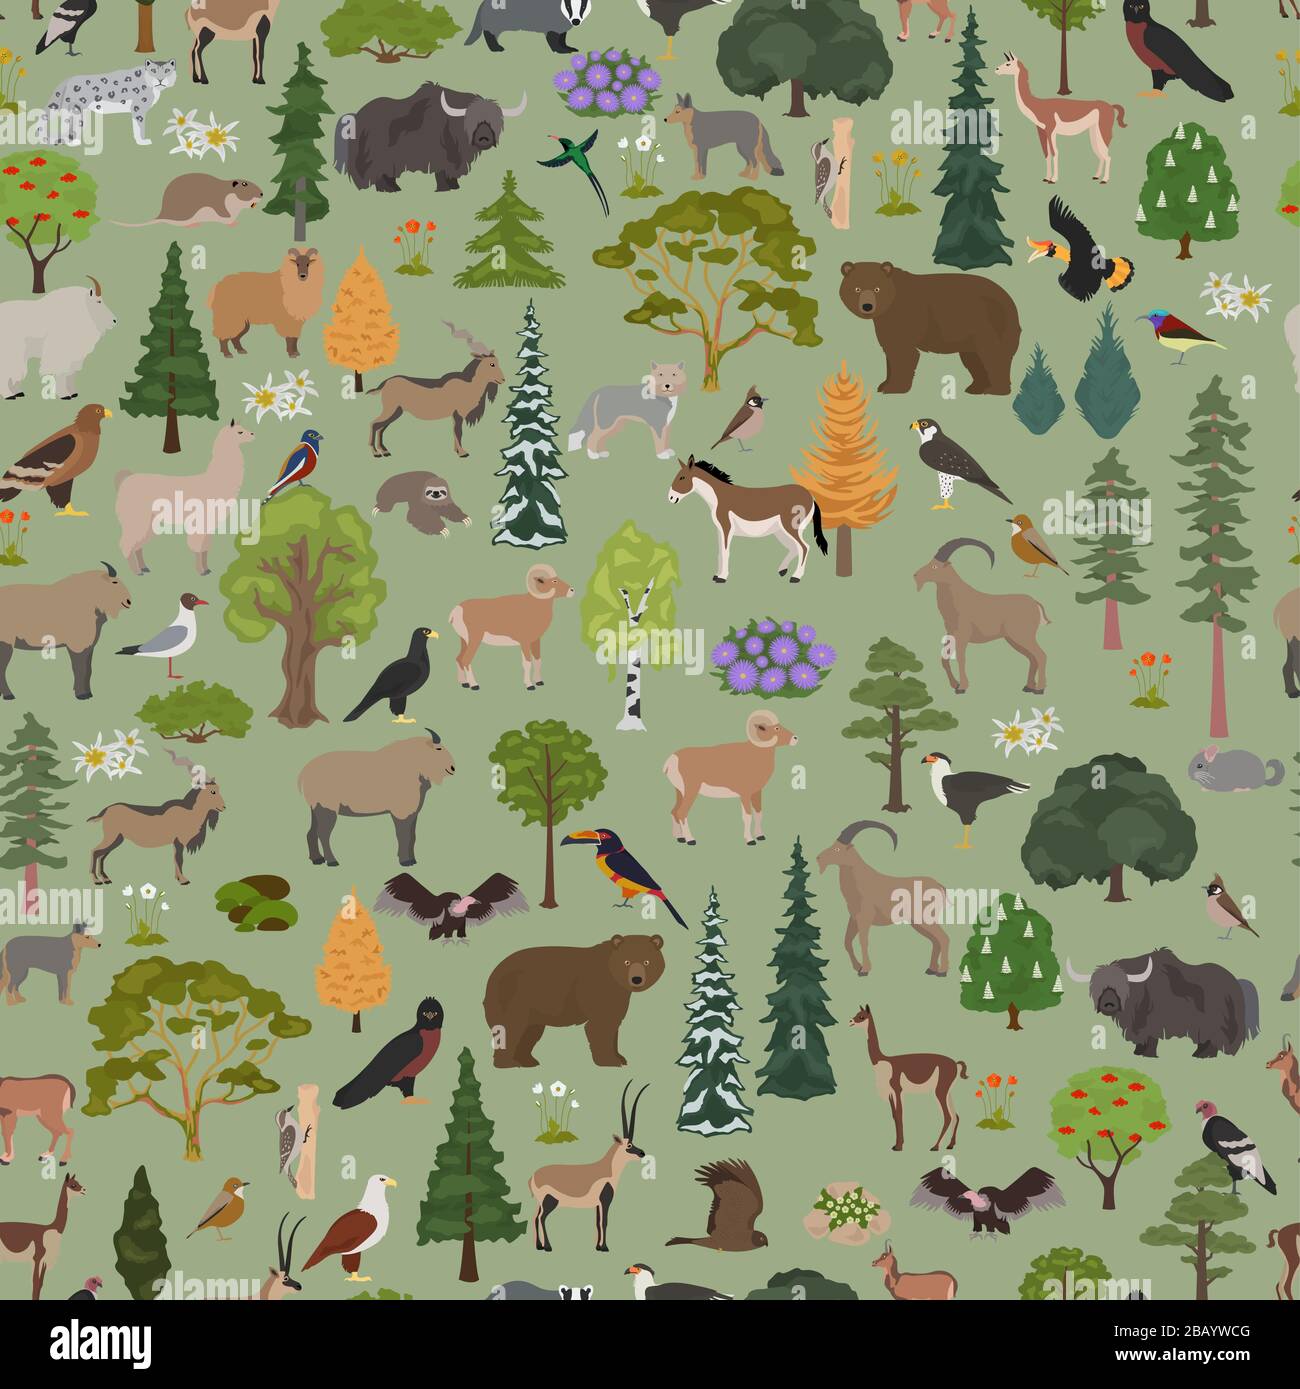 Montane forest biome, natural region seamless pattern. Terrestrial ecosystem world map. Animals, birds and vegetations ecosystem design set. Vector il Stock Vector